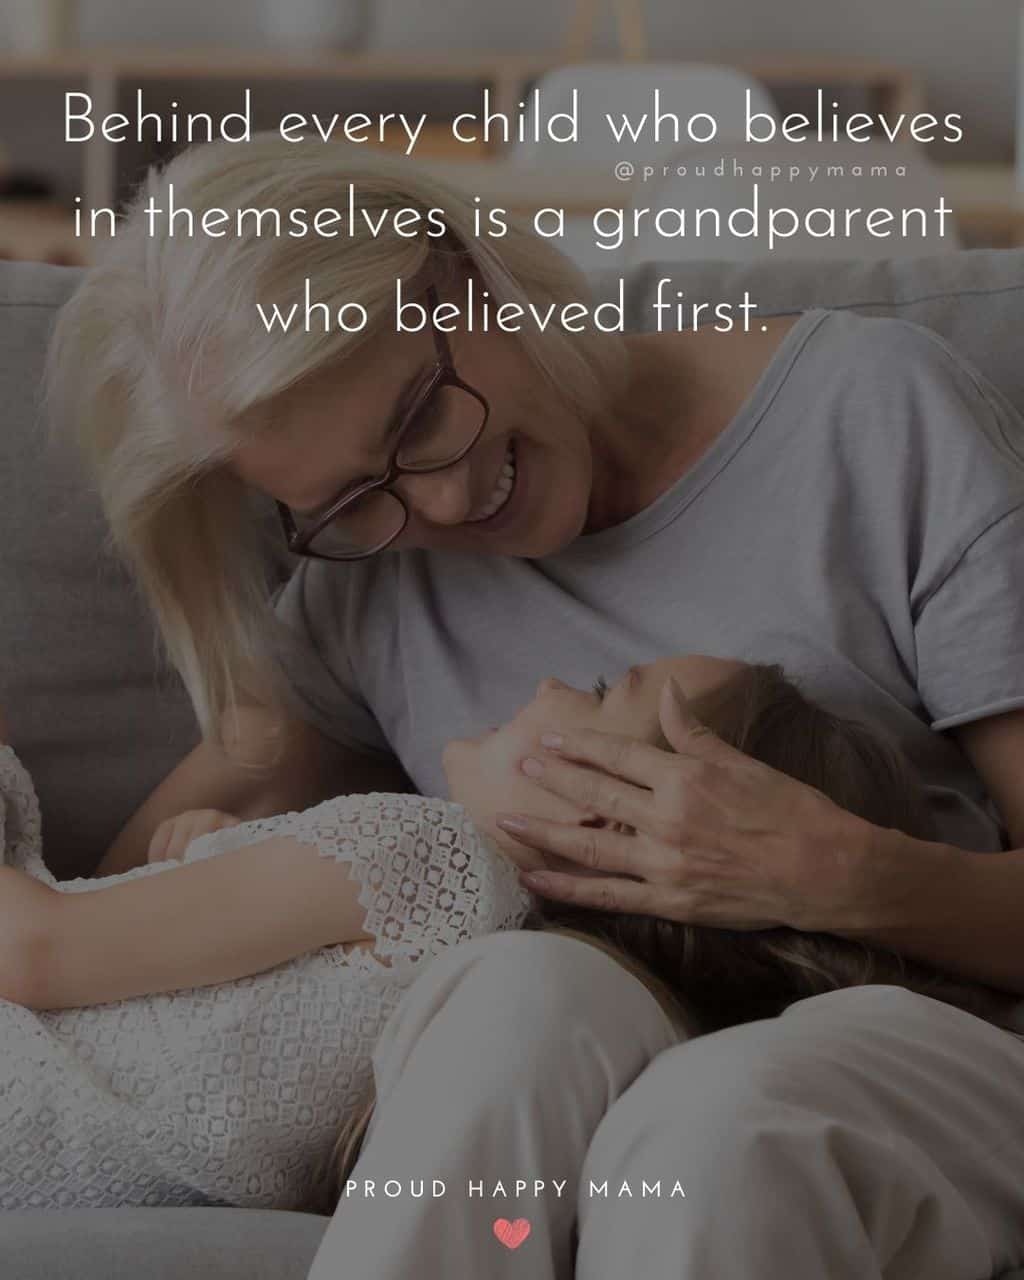 Grandparent Quotes – Behind every child who believes in themselves is a grandparent who believed first.’